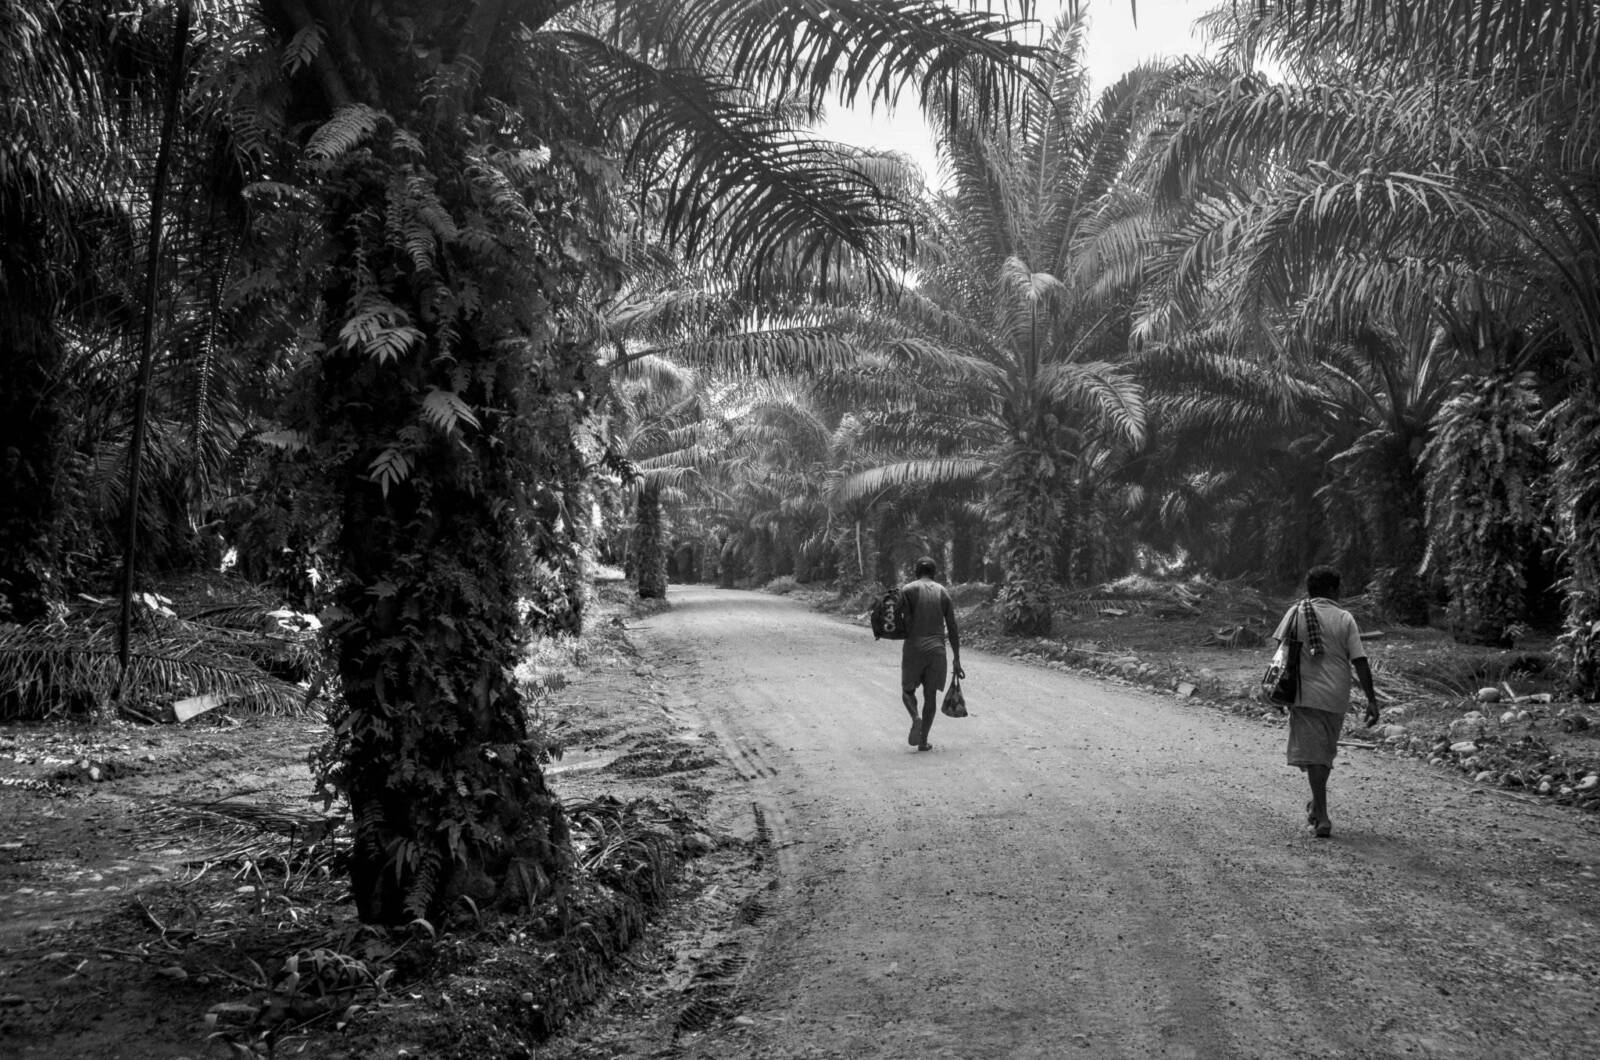 Black and white photo of two persons walking away on a dirt road on an oil palm plantation. The road is lined by oil palms.